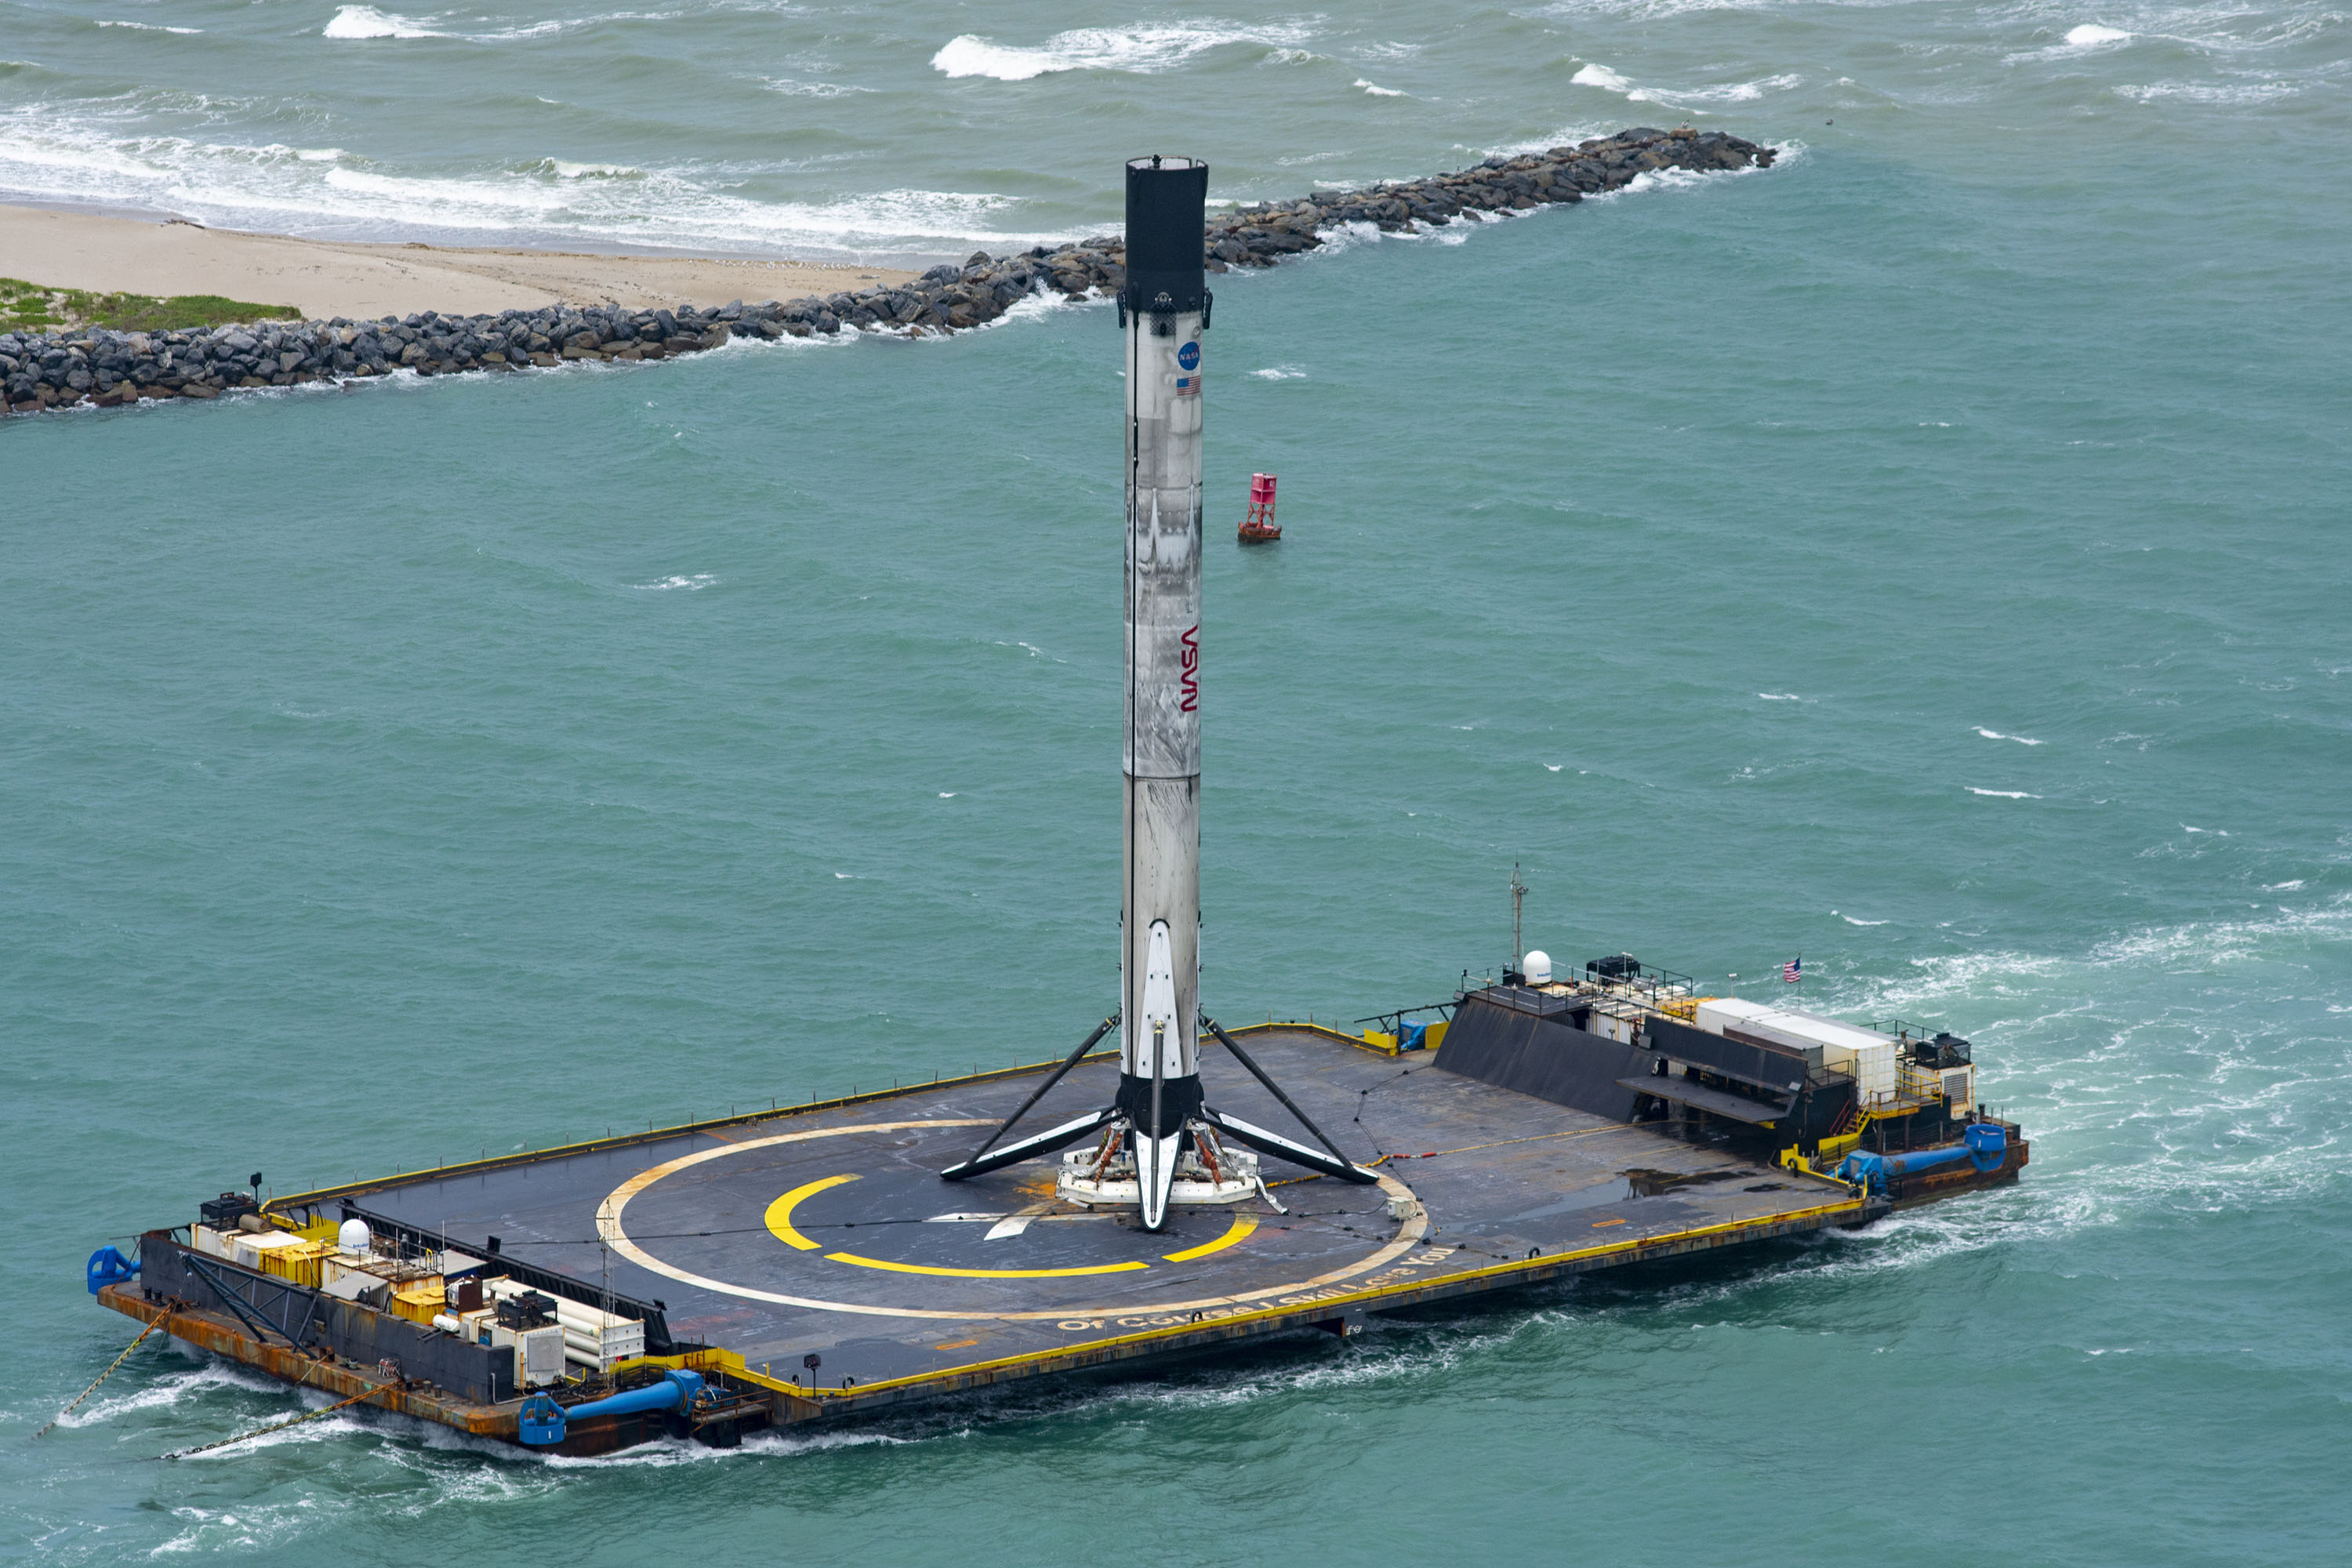 SpaceX rocket returns to Port Canaveral after deploying NASA Astronauts